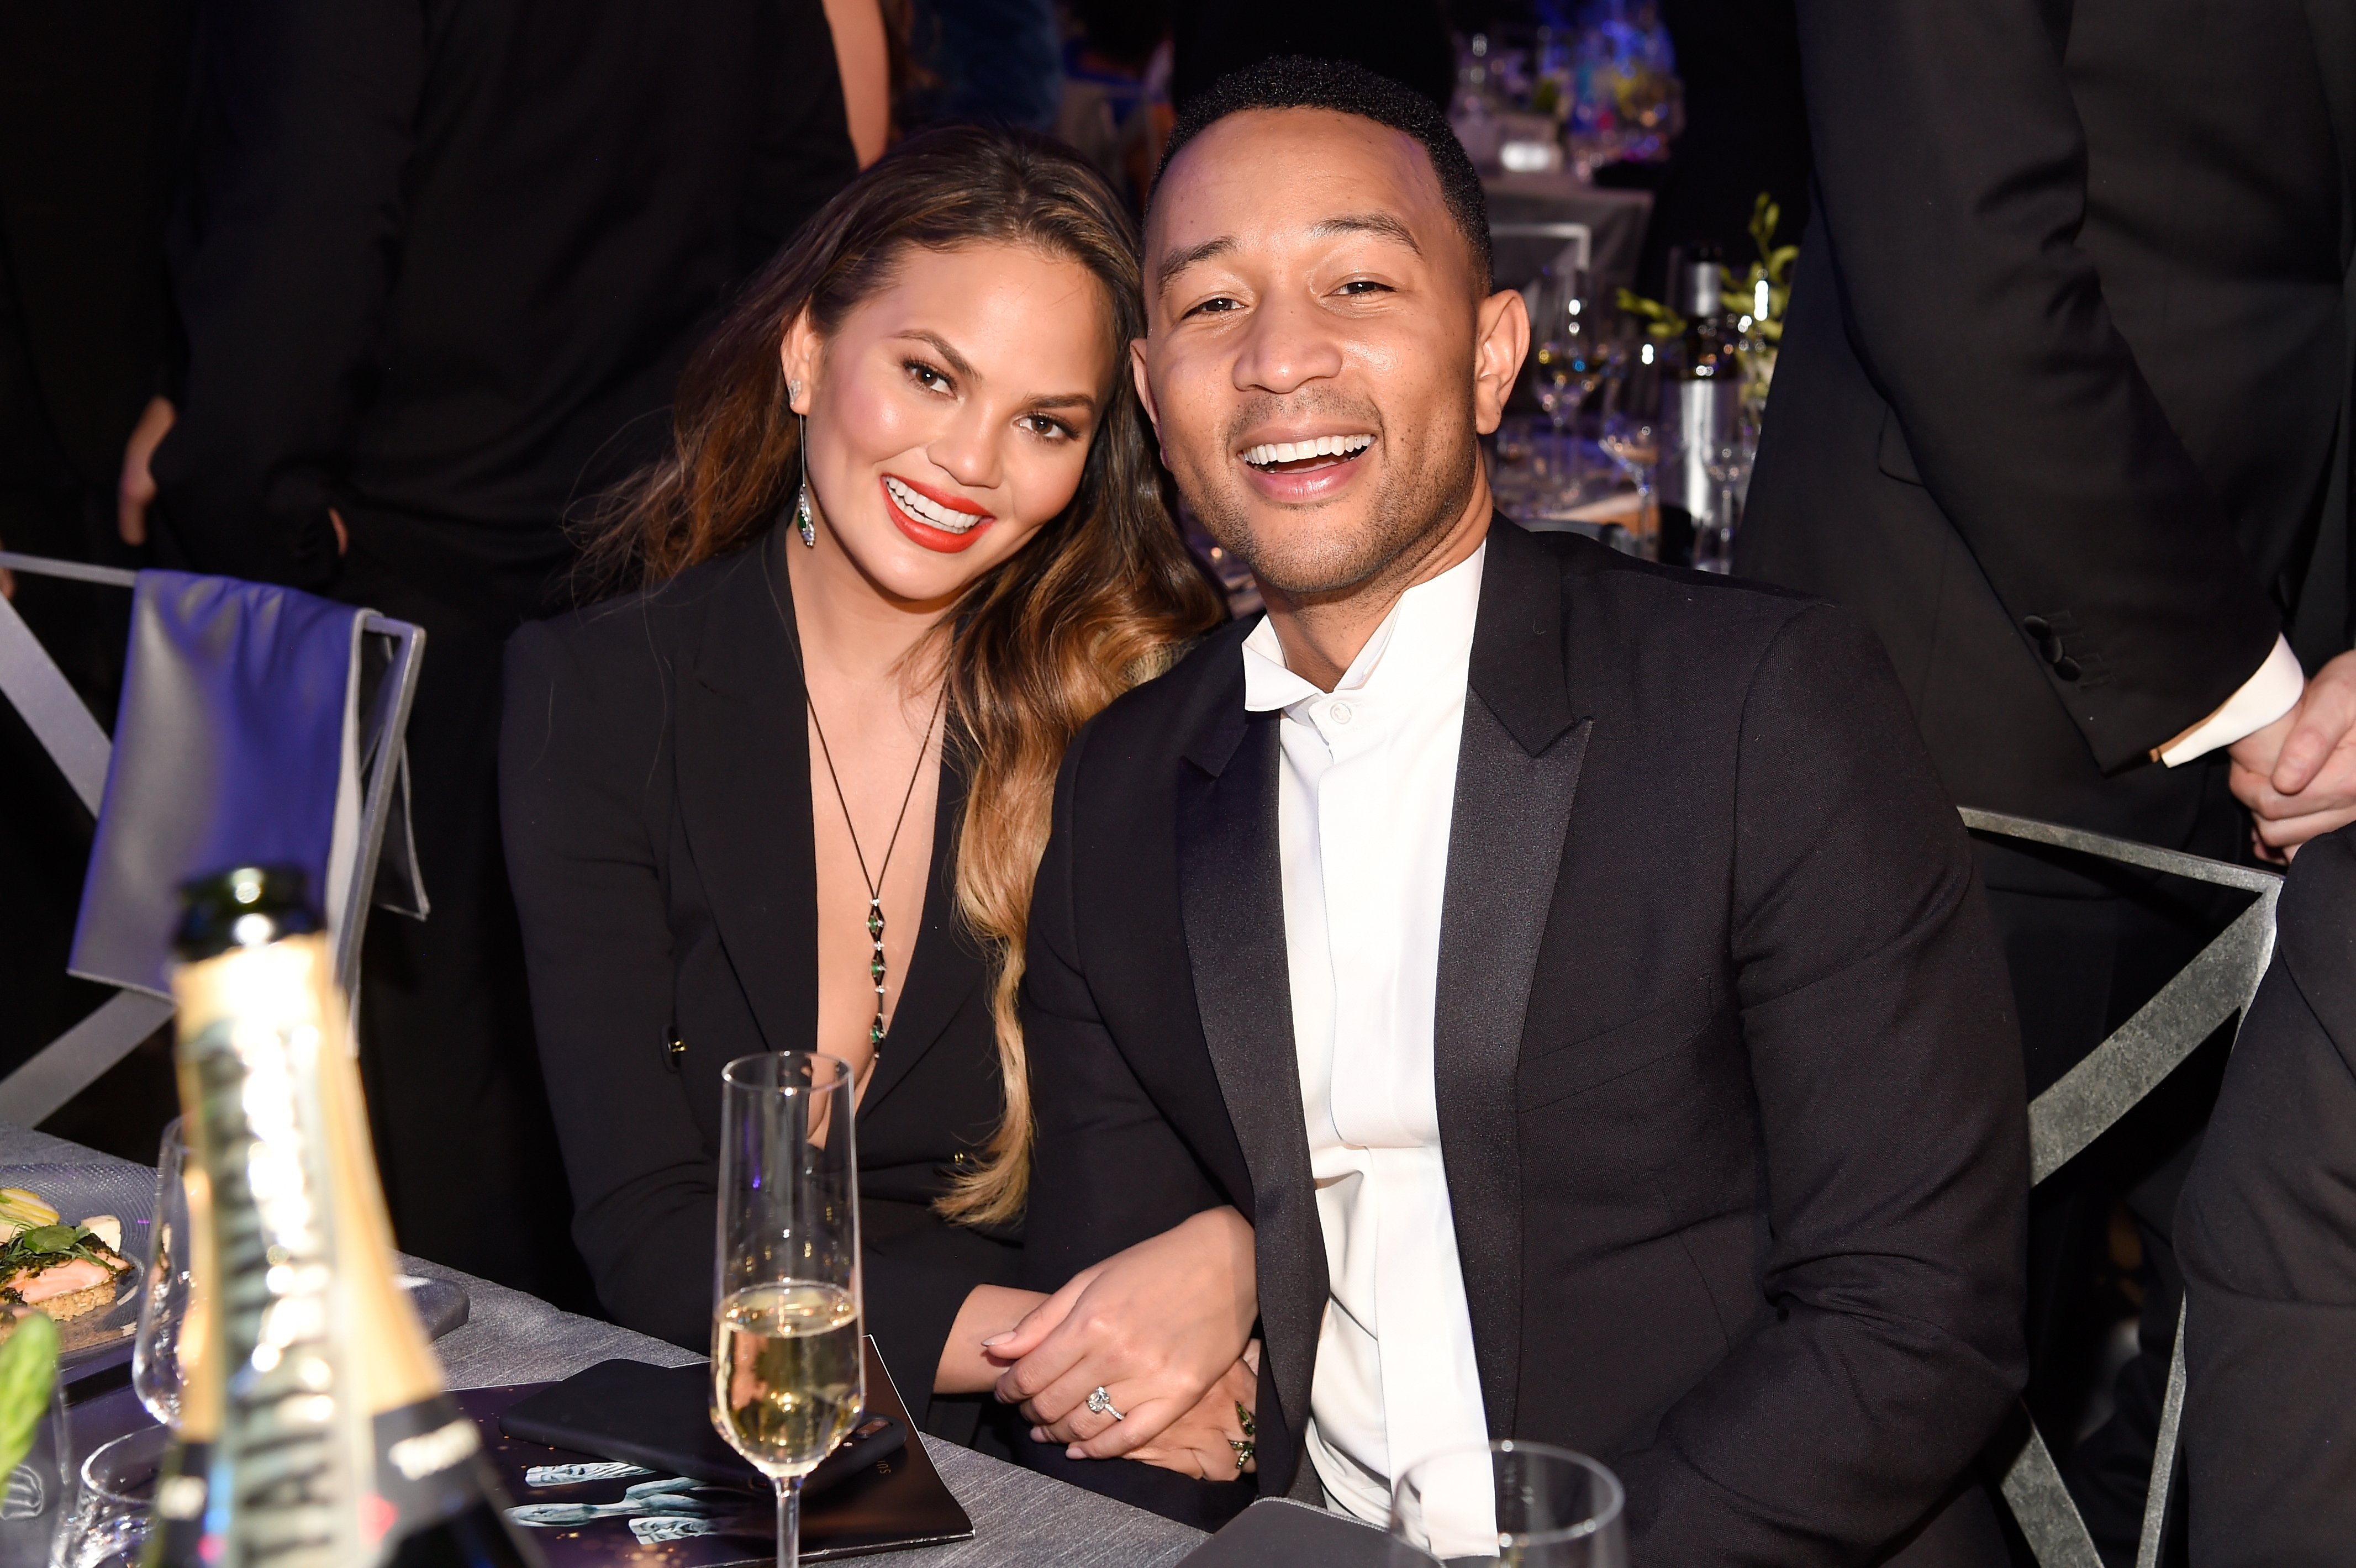 Chrissy Teigen and John Legend attend sthe Annual Screen Actors Guild Awards in Los Angeles on January 29, 2017 | Photo: Getty Images